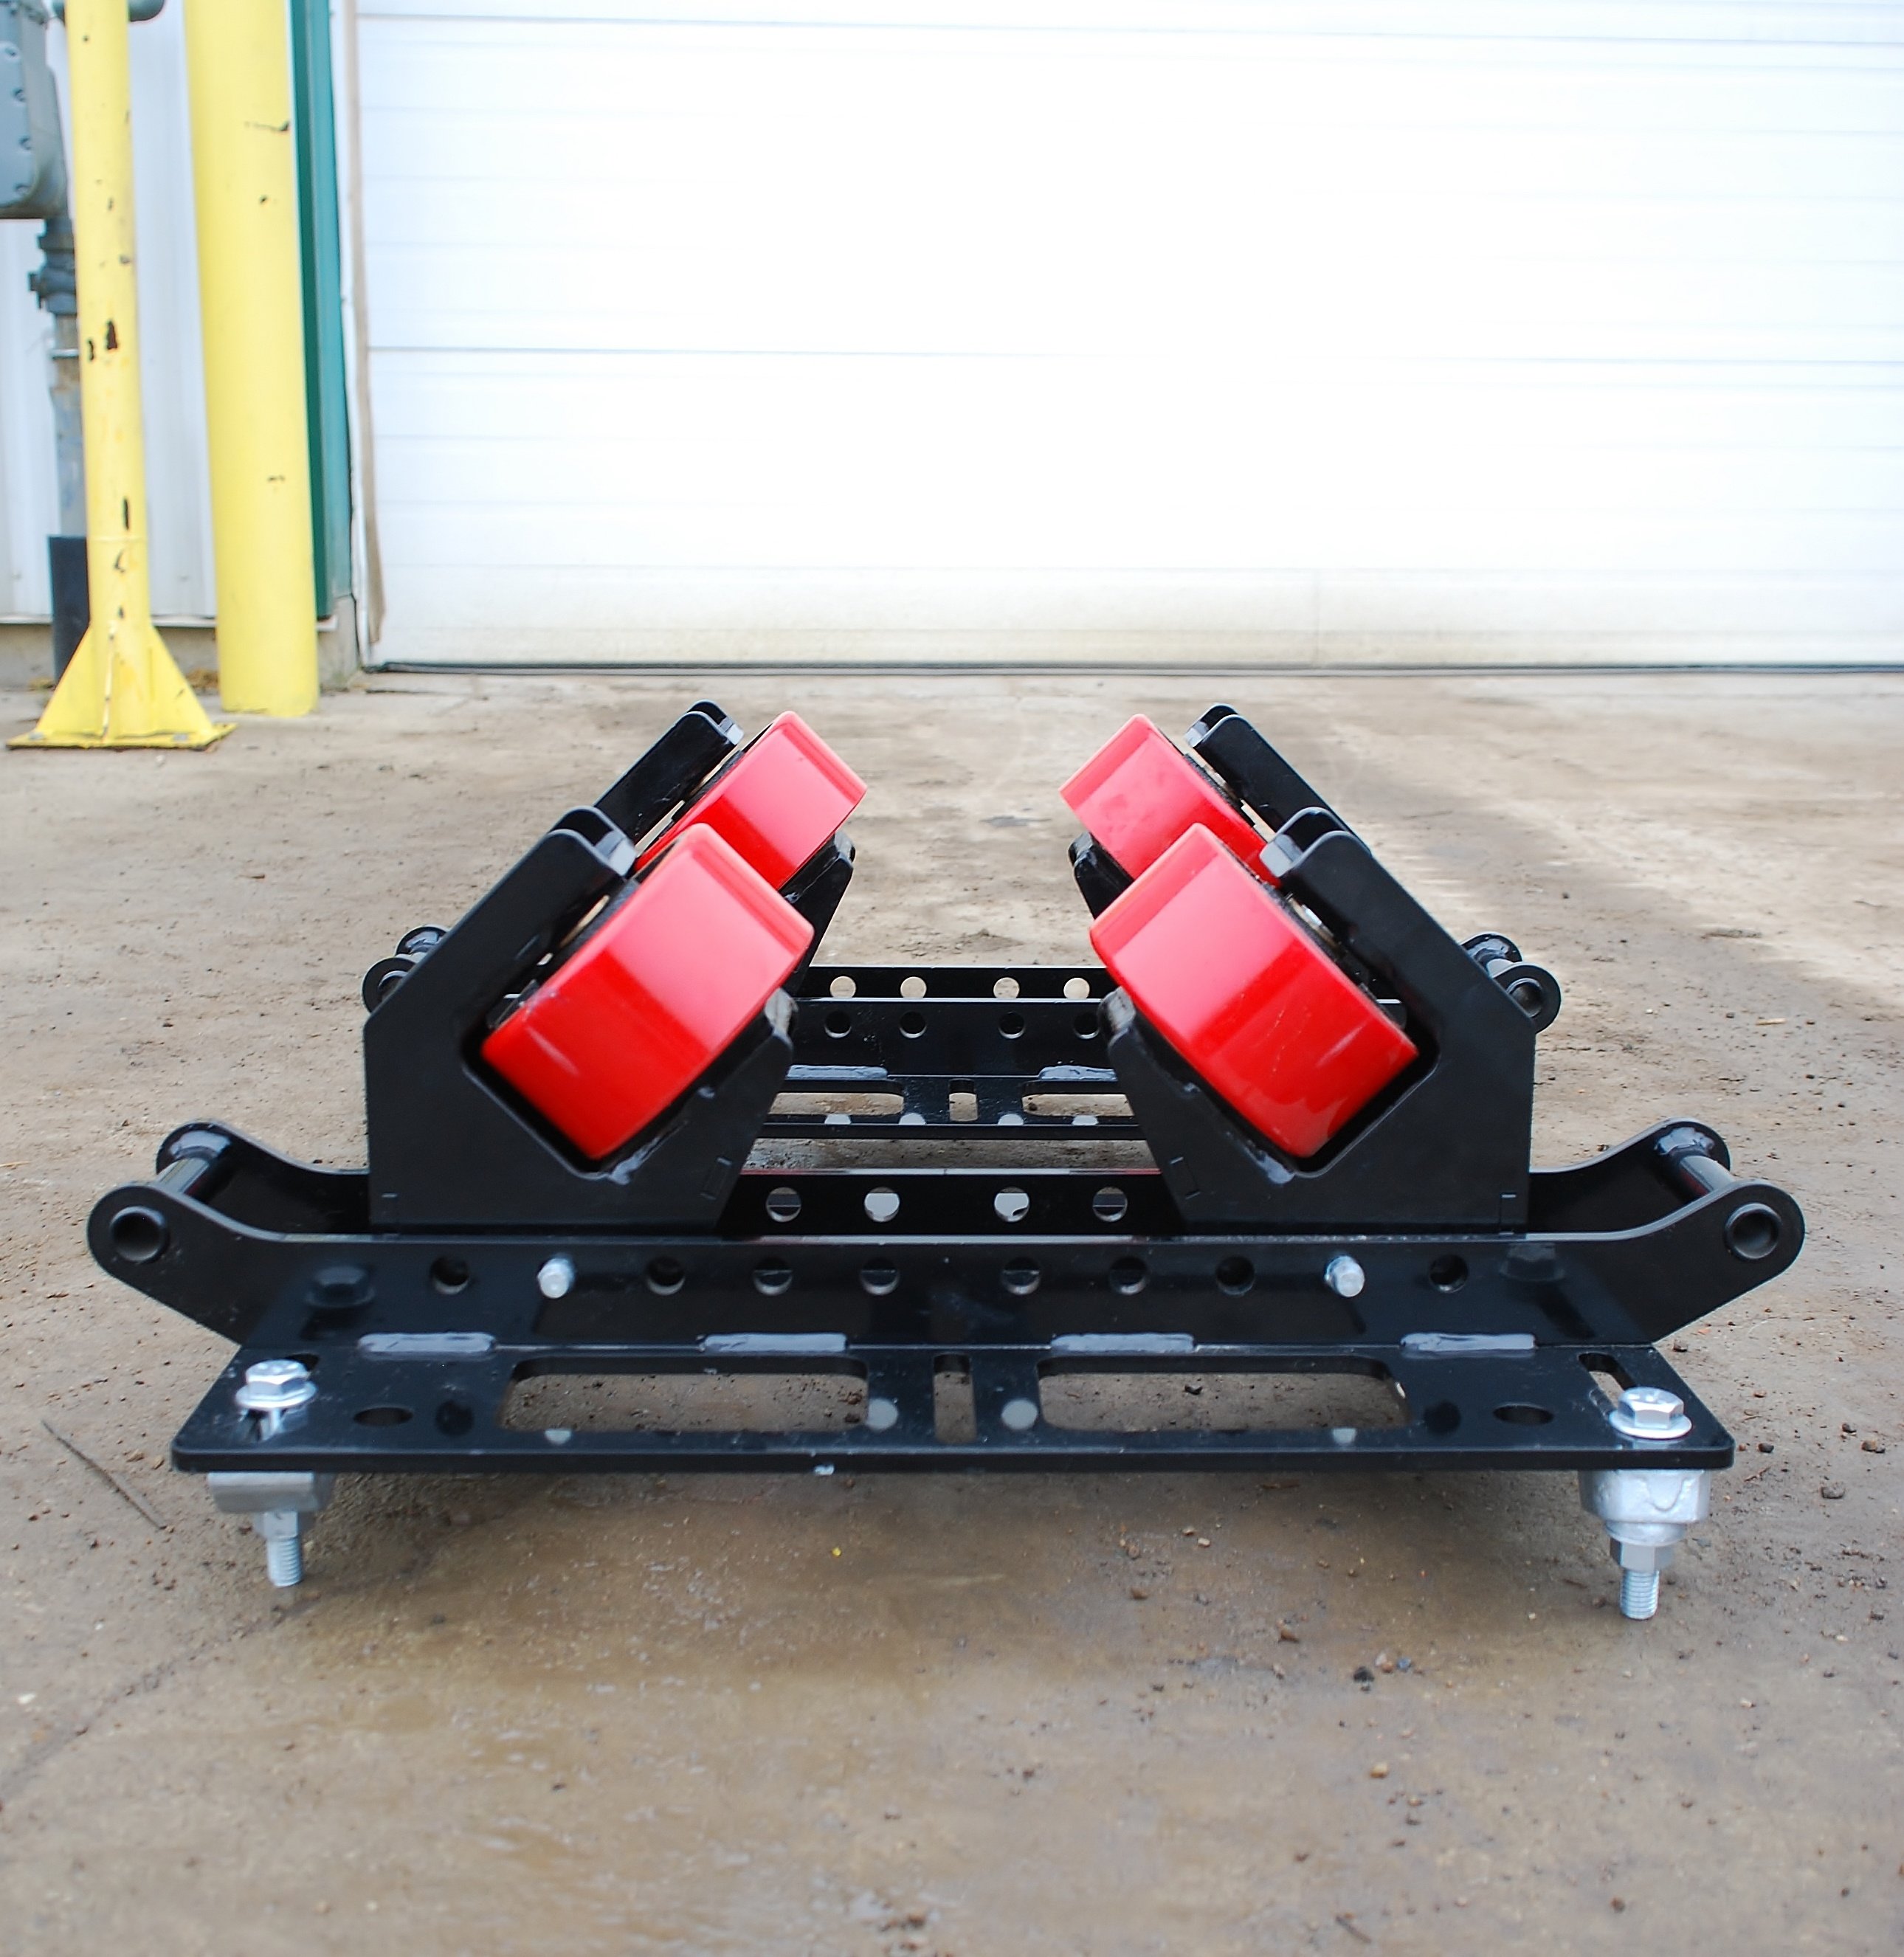 uni-directional pipe rack beam clamp rigging rollers for sale (2-ton capacity)